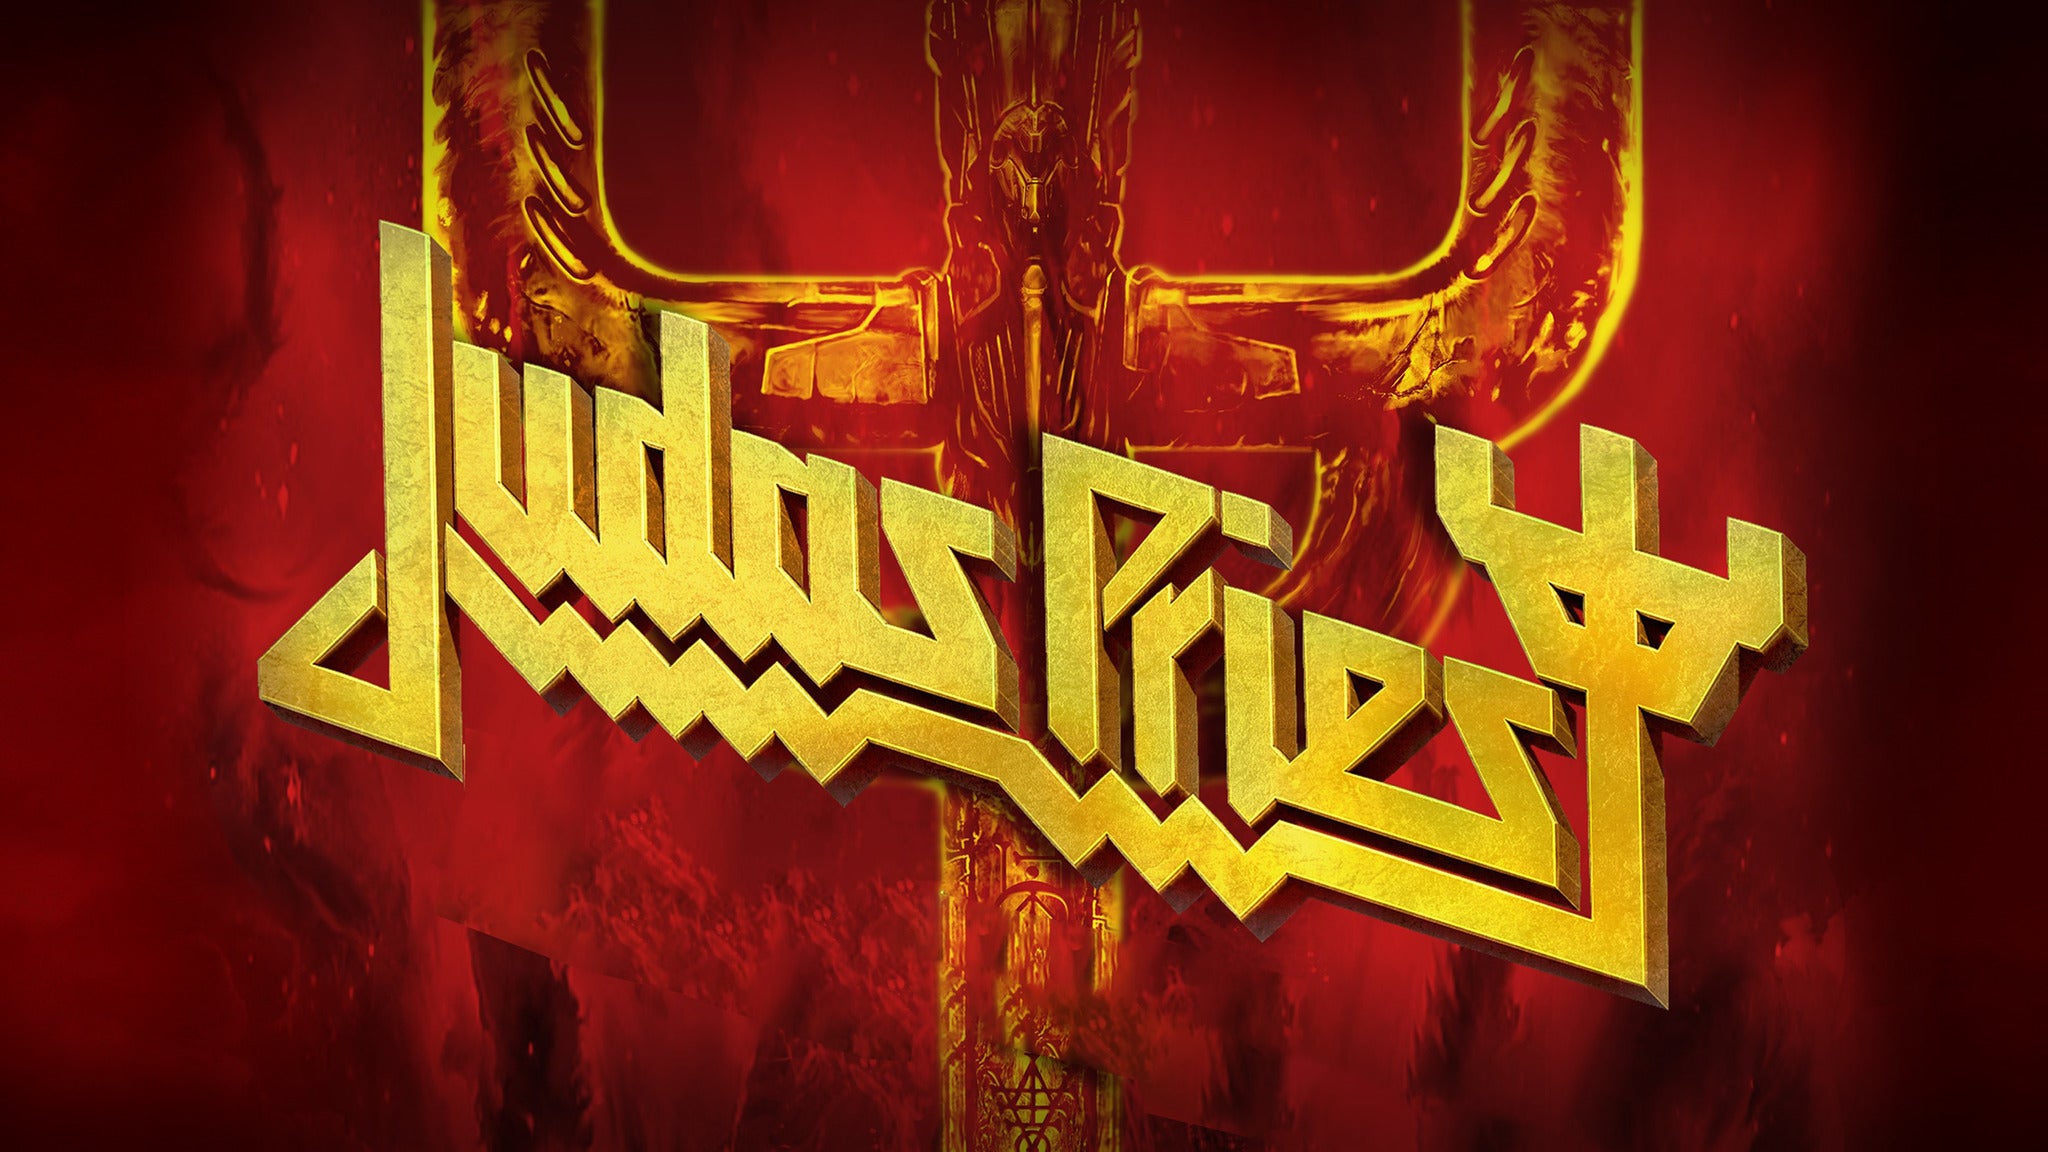 Judas Priest: 50 Heavy Metal Years presale code for early tickets in Oklahoma City